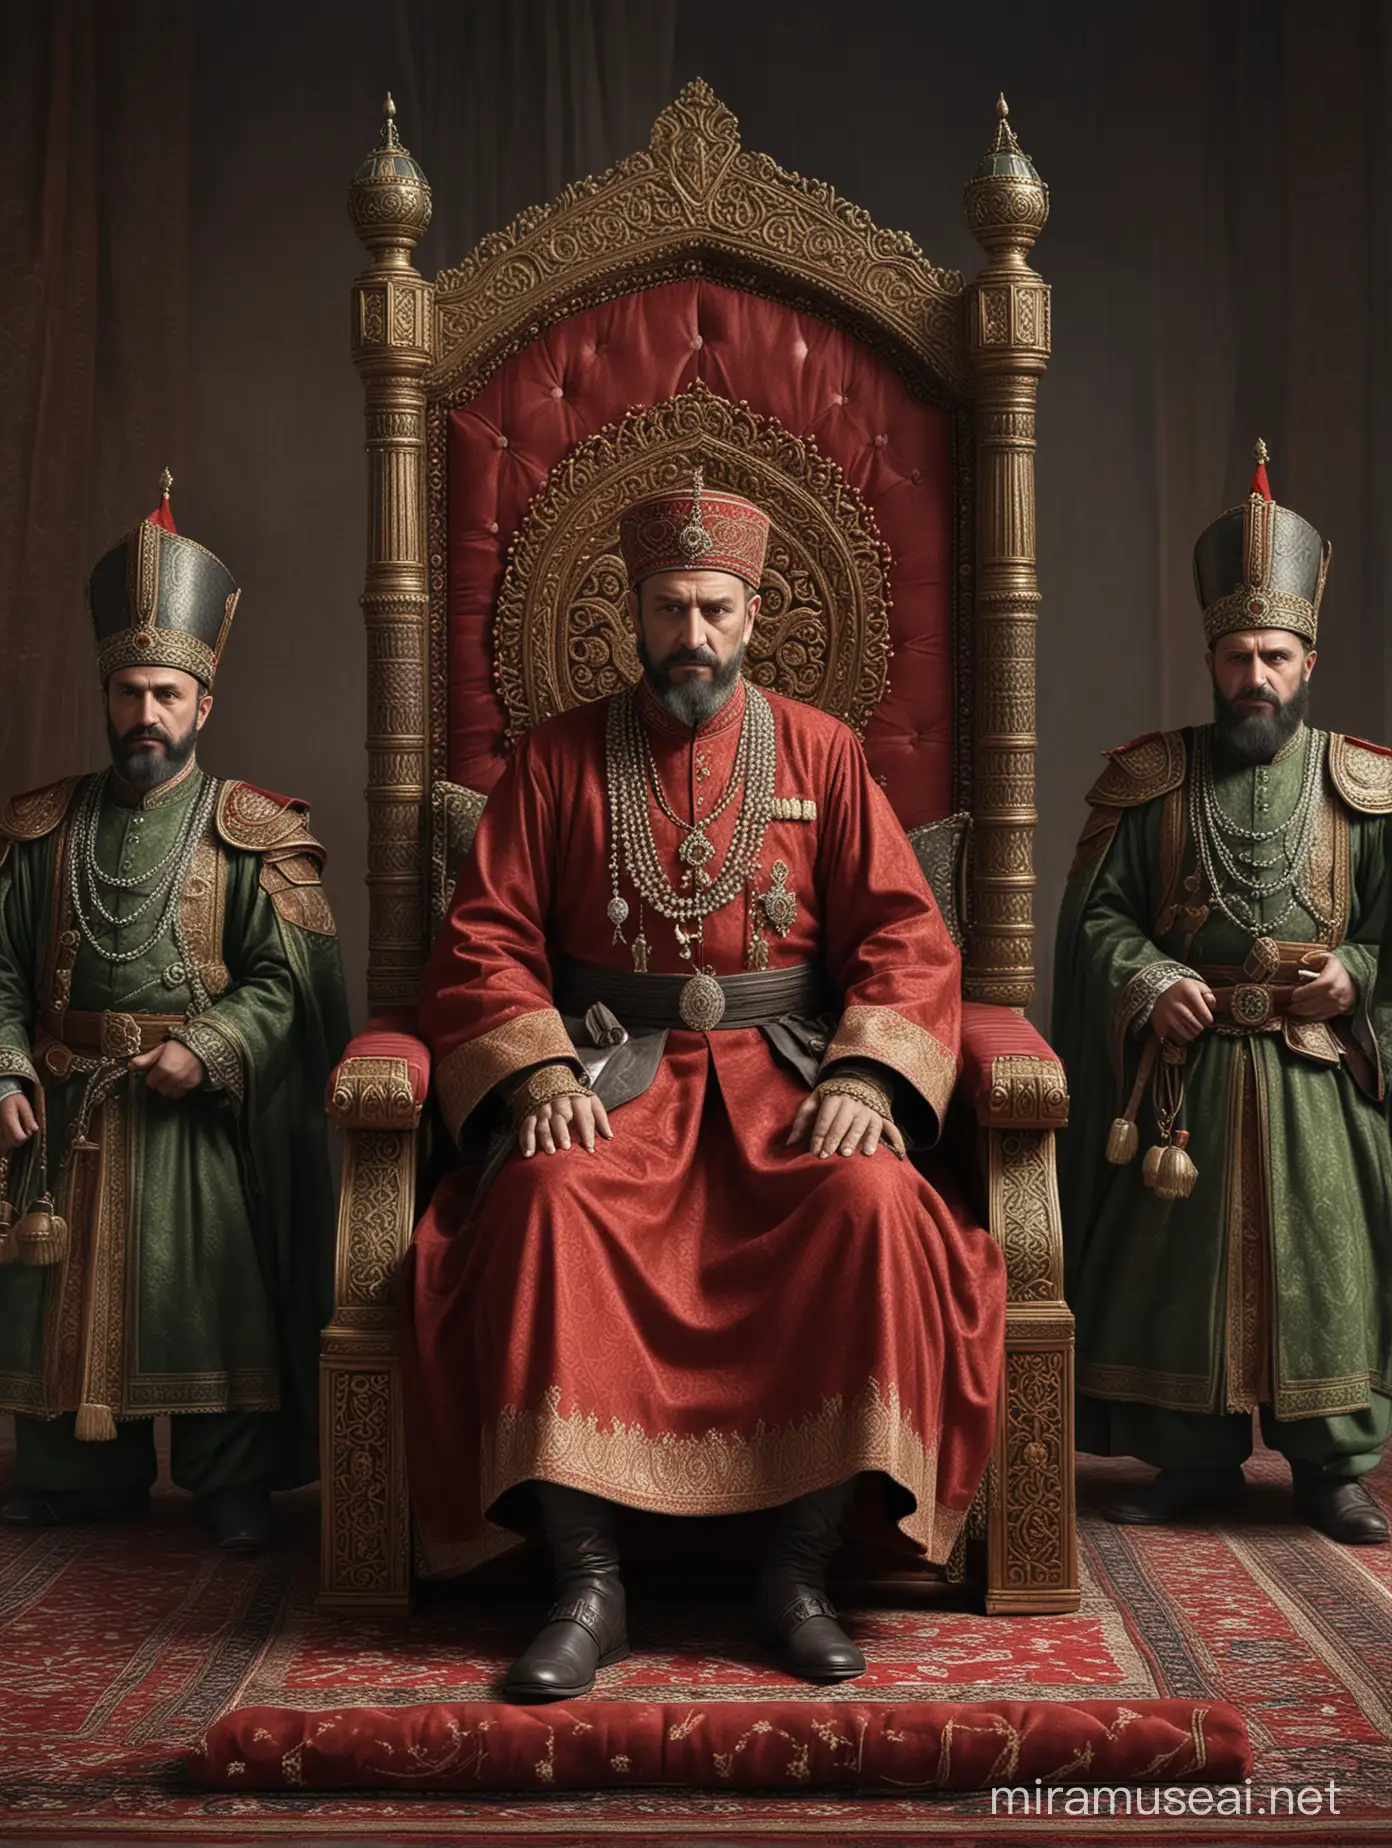 Generate an image of the Ottoman  Sultan Mehmed IV sitting in his throne. His guards are next to him for protection. Hyper realistic